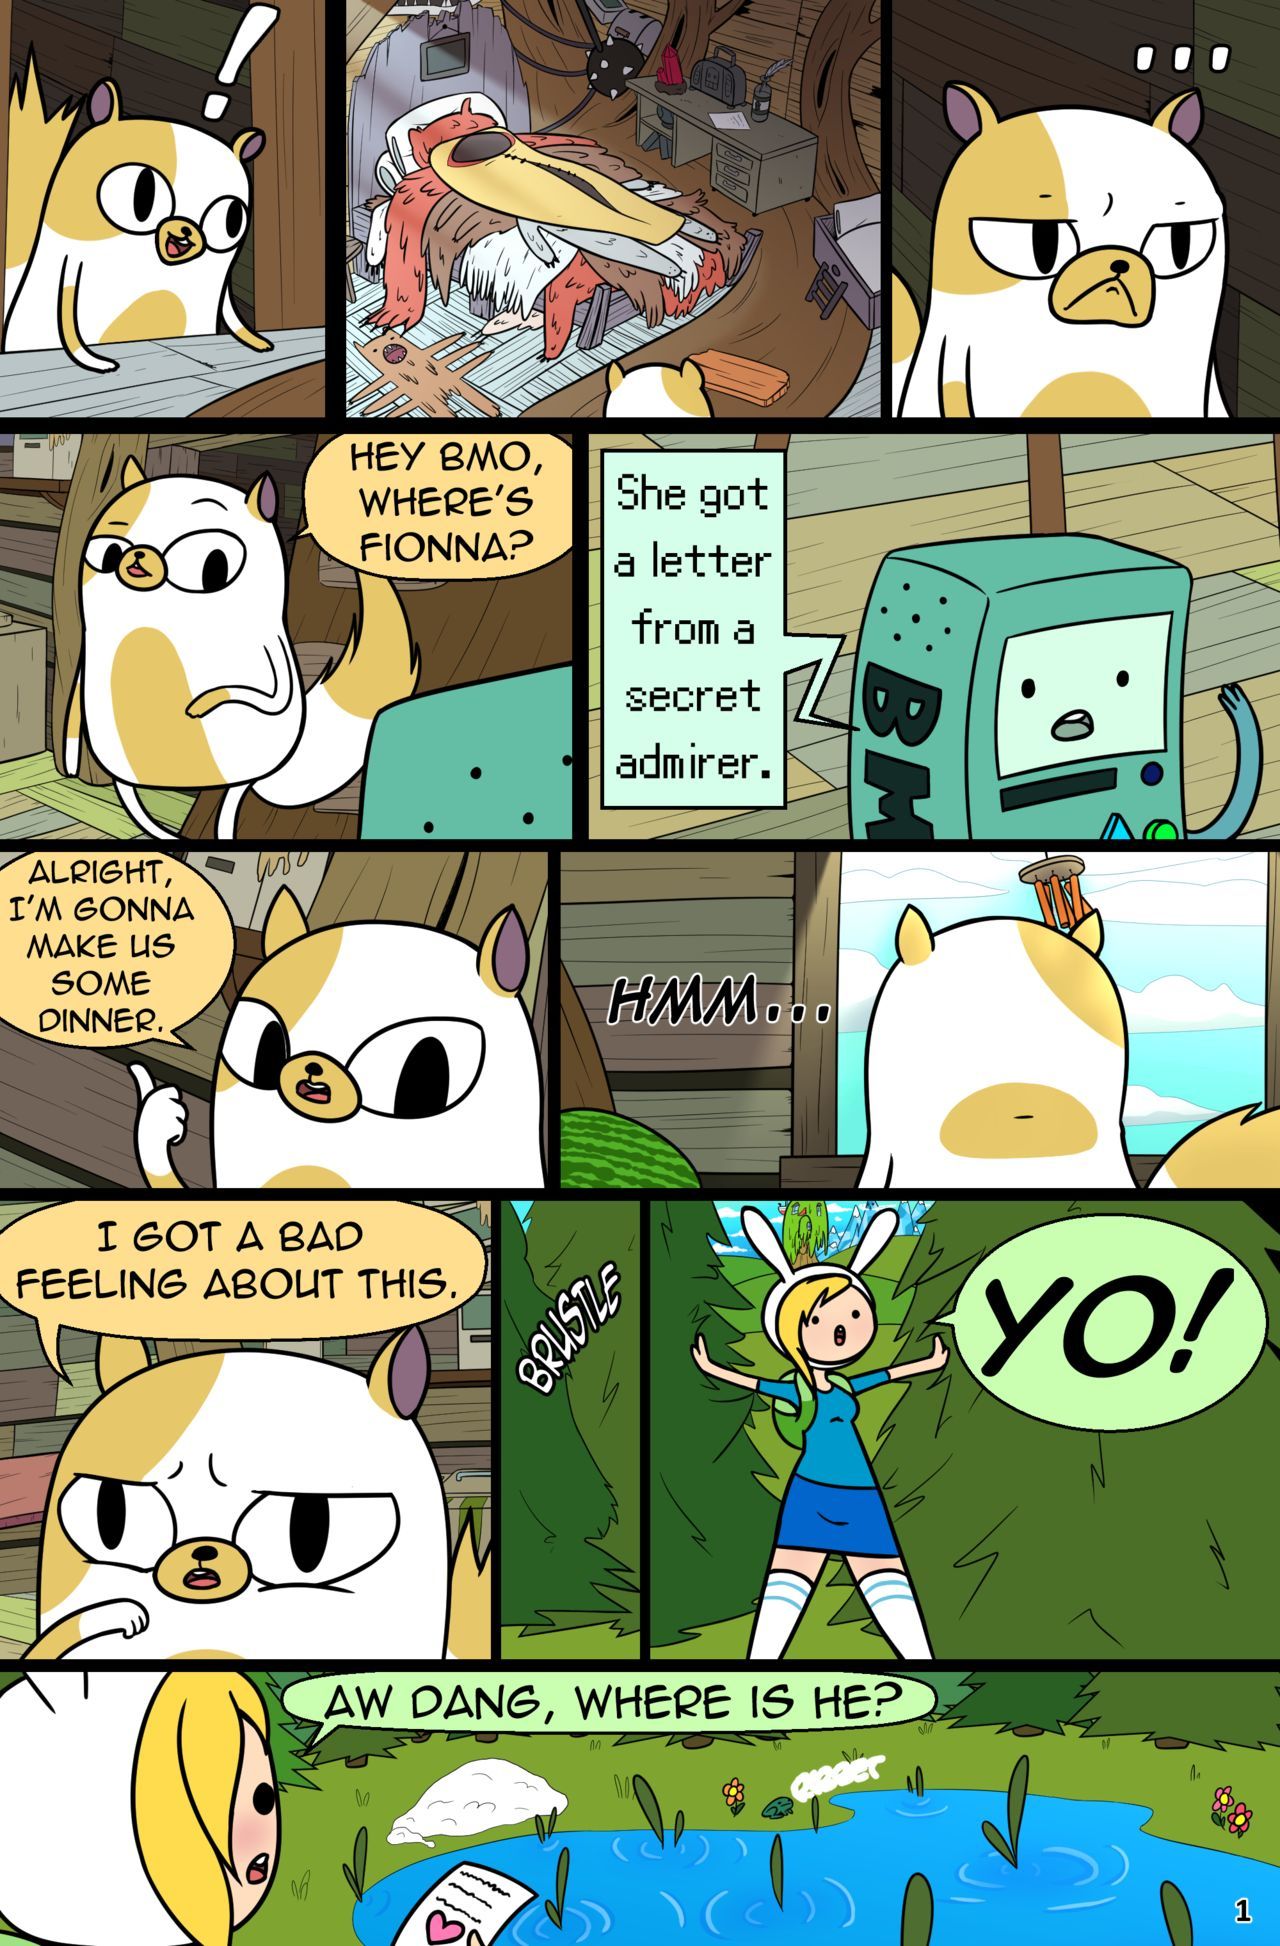 [cubbychambers] MisAdventure Time Spring Special - The Cat, the Queen, and the Forest (COLOR)